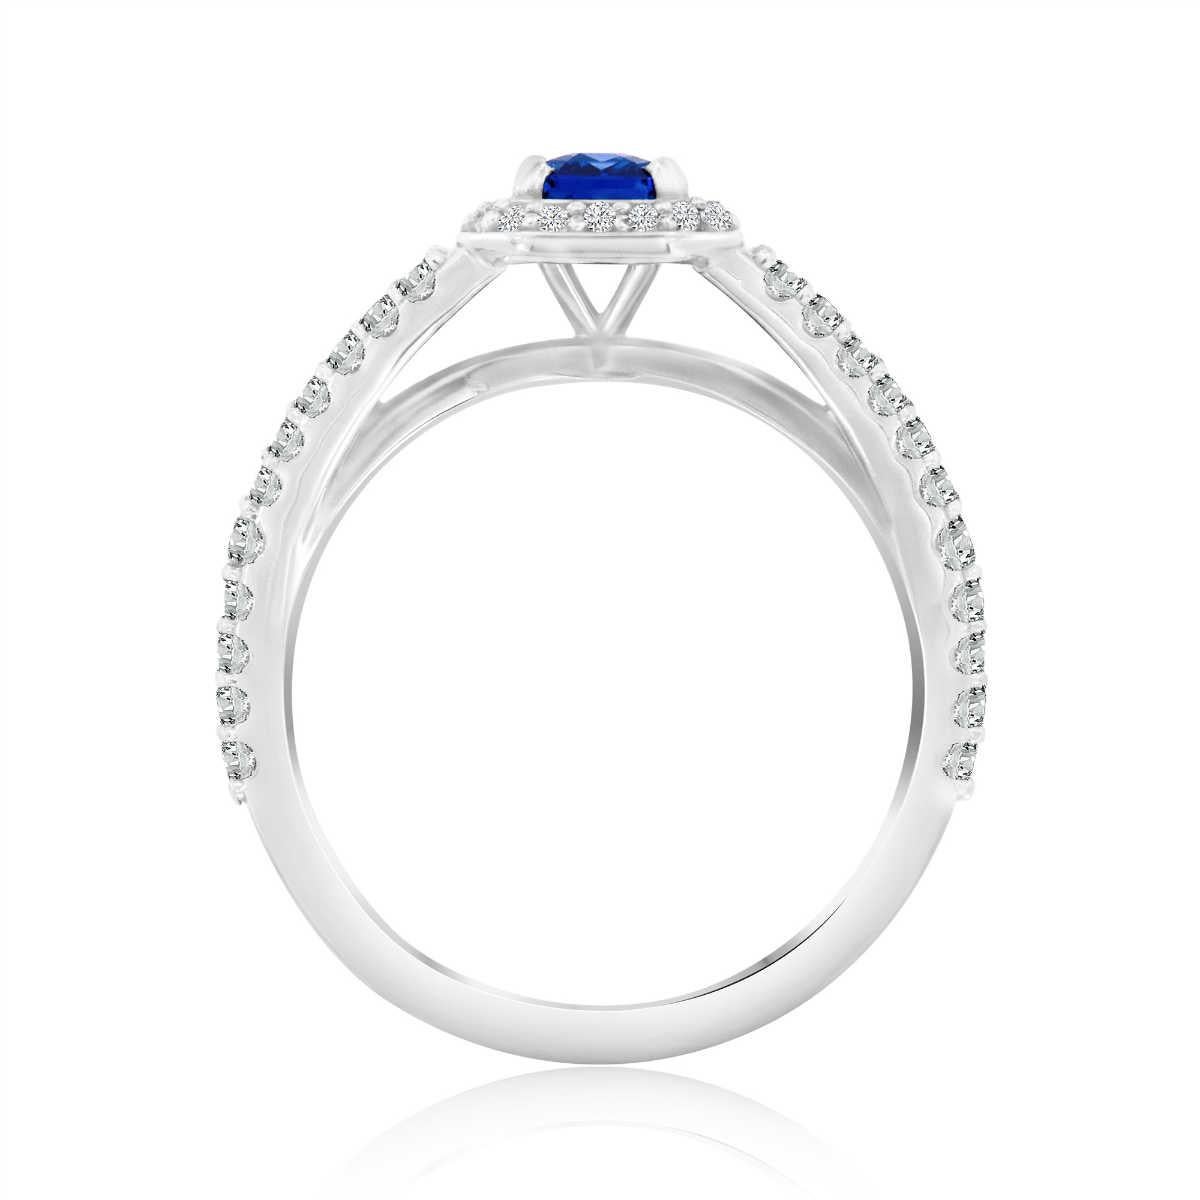 This elegant ring features a 0.82 carat Emerald shape, Sri Lankan Blue Sapphire encircled by a halo of round melee diamonds. A scalloped micro-prong split-shank band adds a dazzling effect. Experience the difference in person!

Product details: